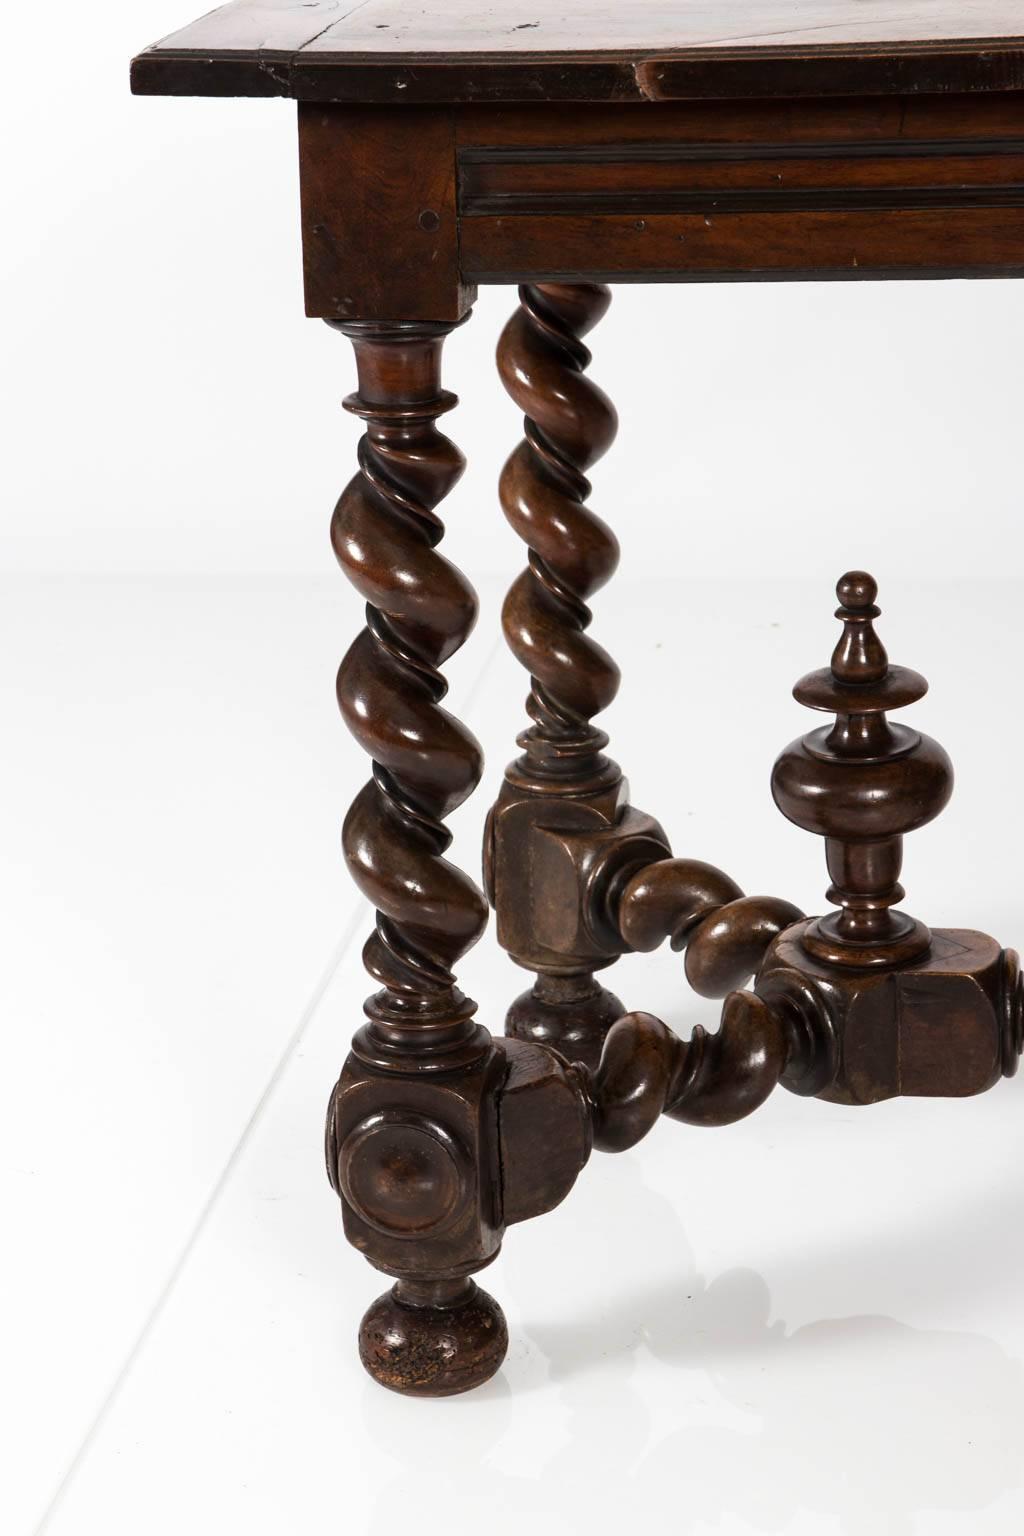 Jacobean barley twist side table with double spindle work finials, circa early 20th century.
 